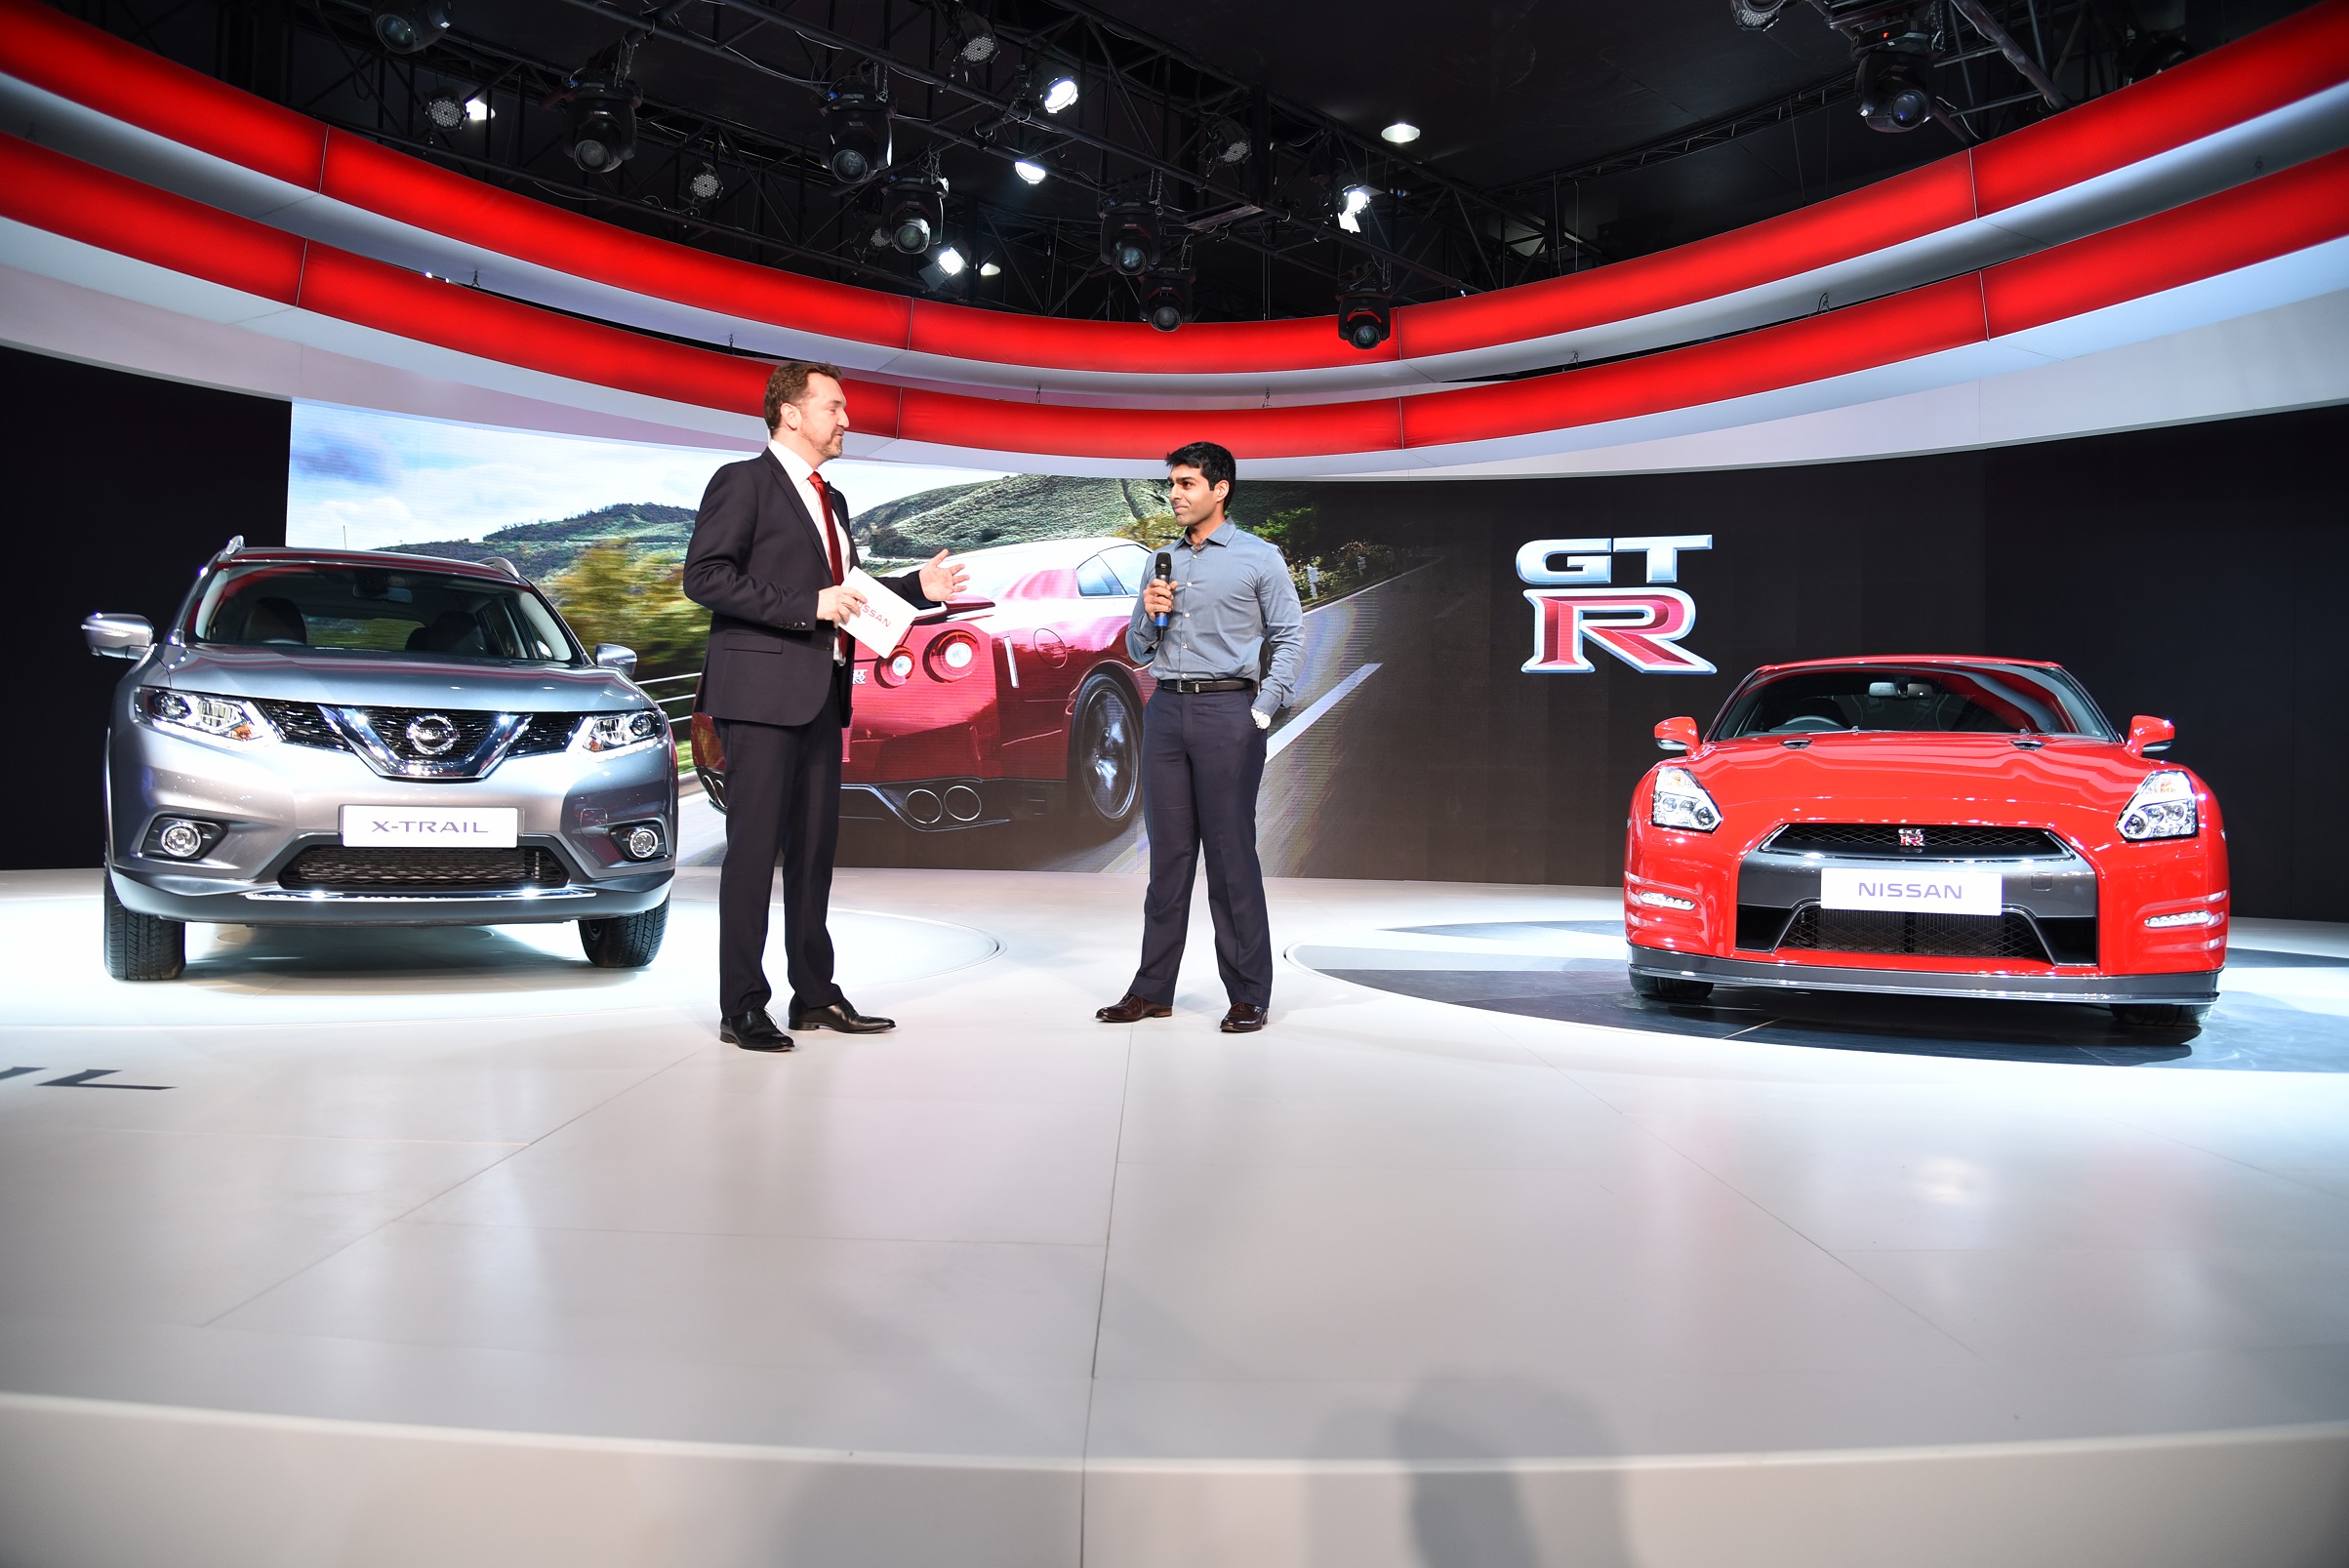 Picture 3 - Guillaume Sicard - President, Nissan India Operations along with F1 rally driver Karun Chandhok at the showcase of X-Trail and GT-R in India